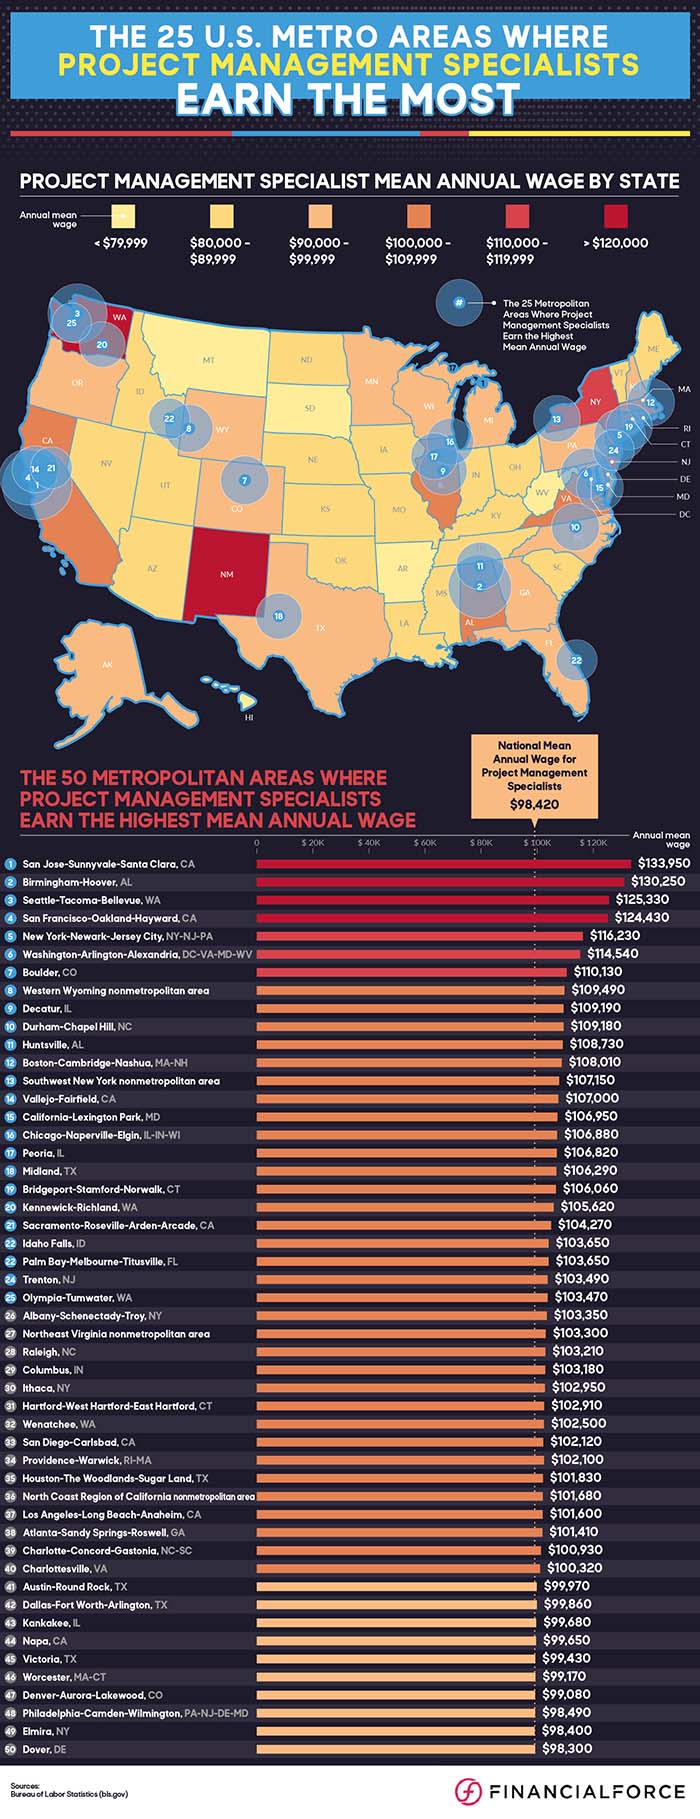 The 25 U.S. Metro Areas Where Project Management Specialists Earn the Most - Infographic